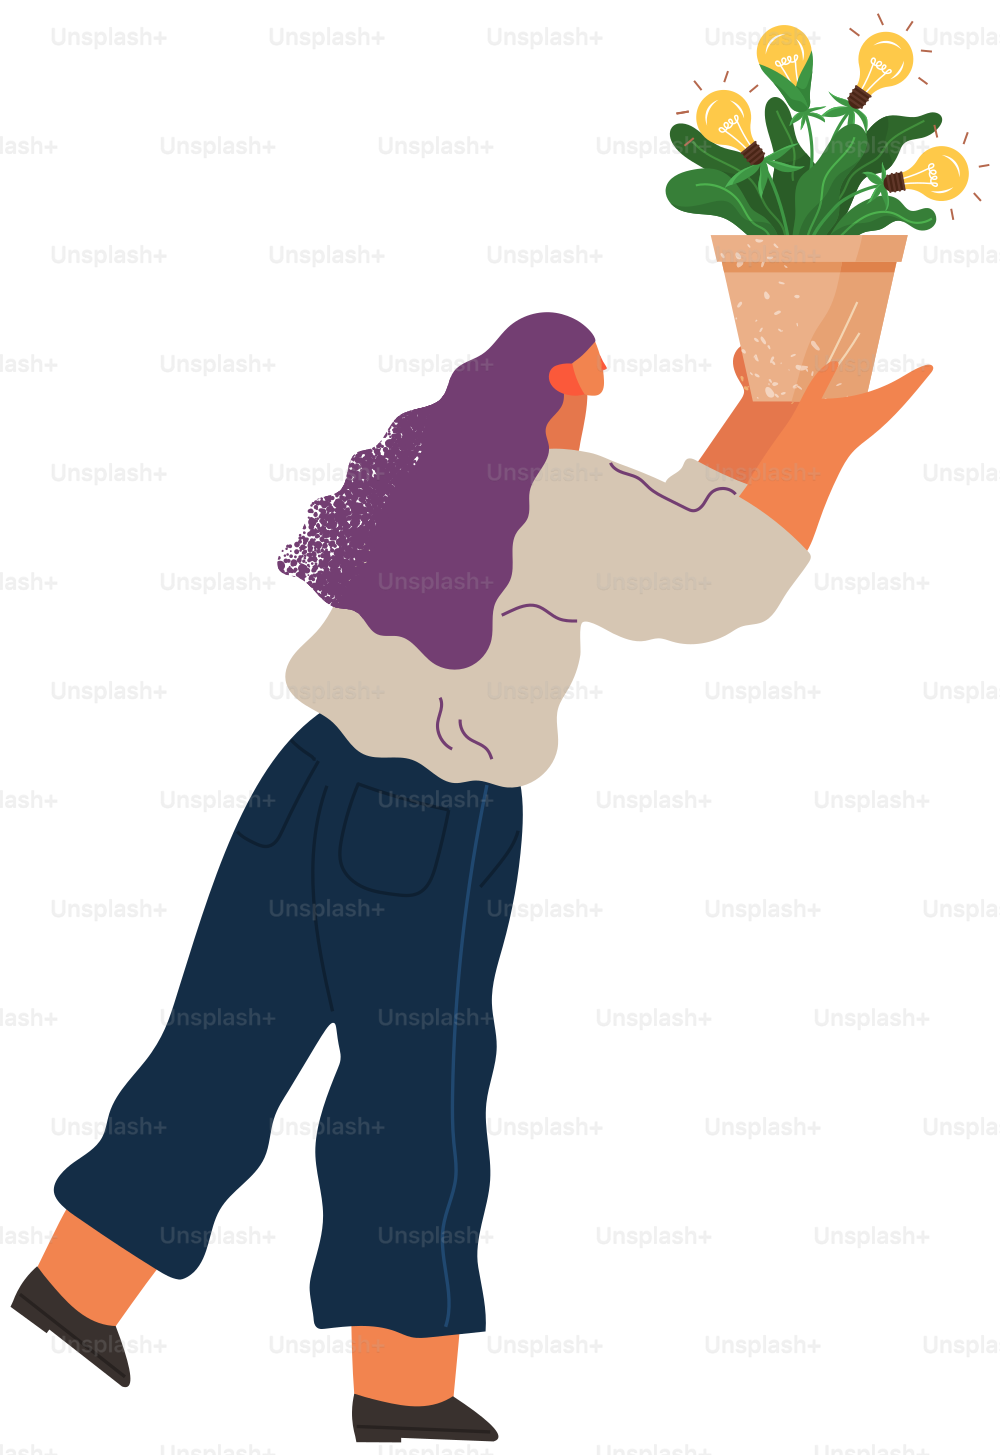 Concept of great idea. Woman has good idea holding potted plant with lightbulbs in hands. Solution of problem, creative thinking, new startup. Idea generation, imagination, creativity, solution